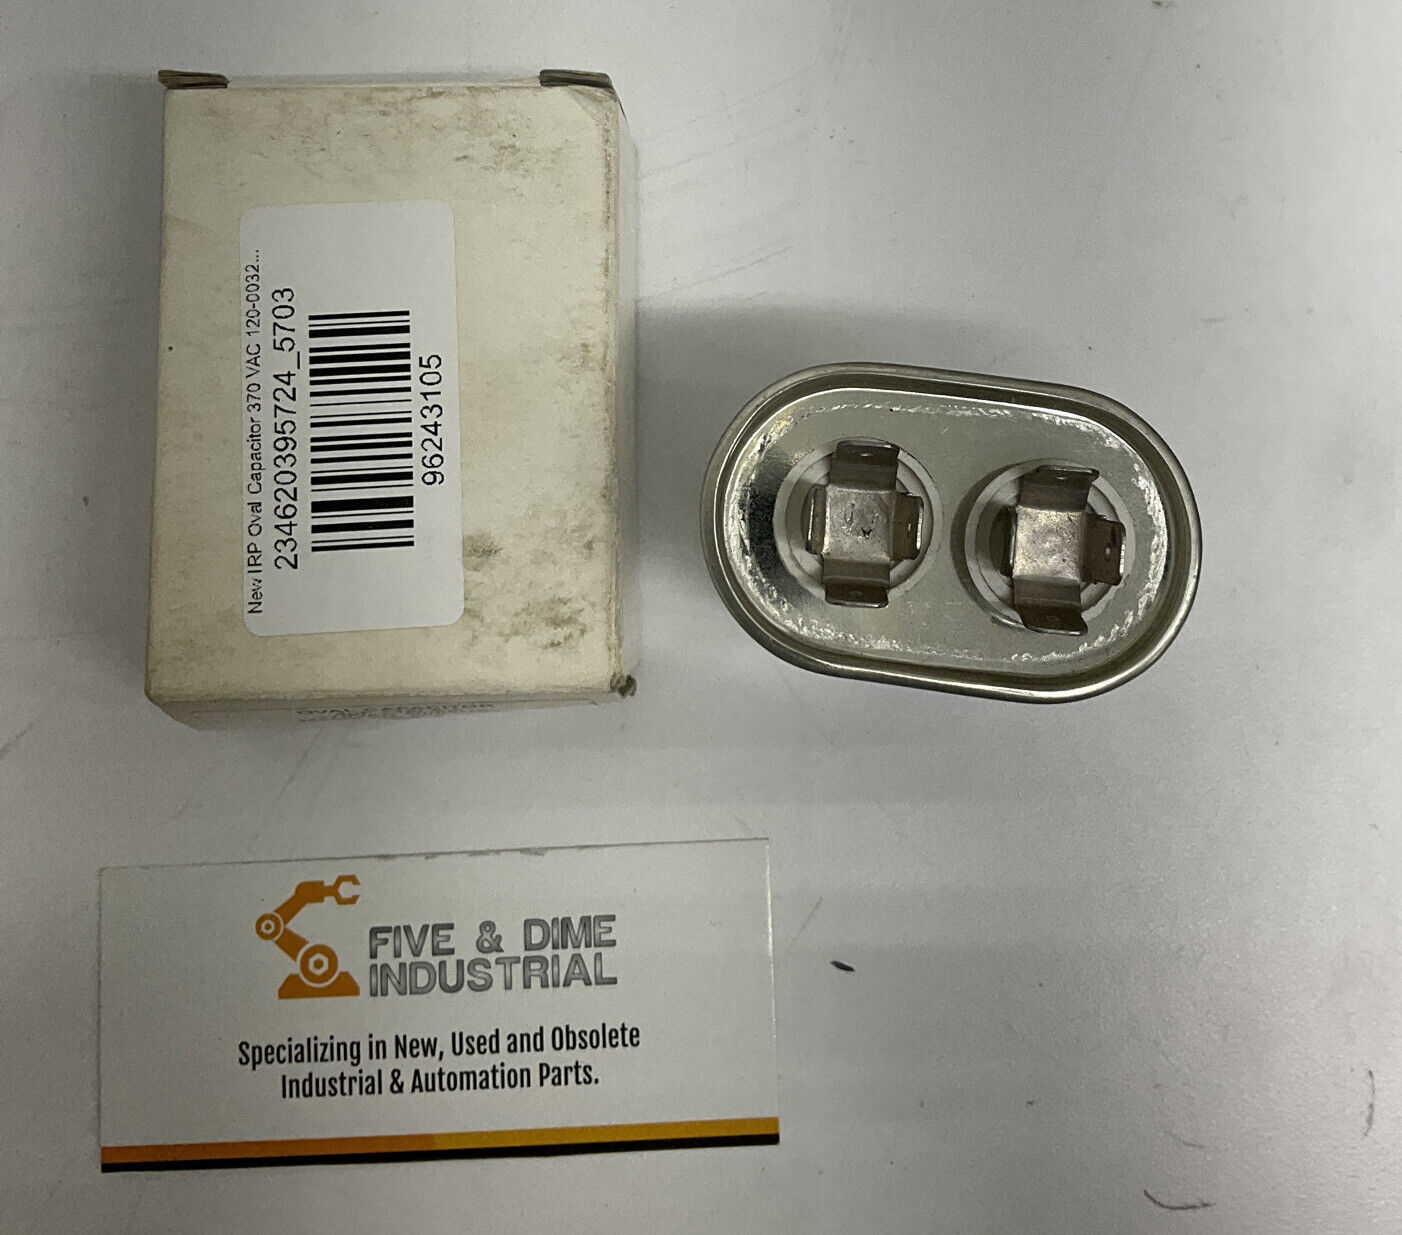 IRP CR4X370 Oval Capacitor 370 VAC (BL154)